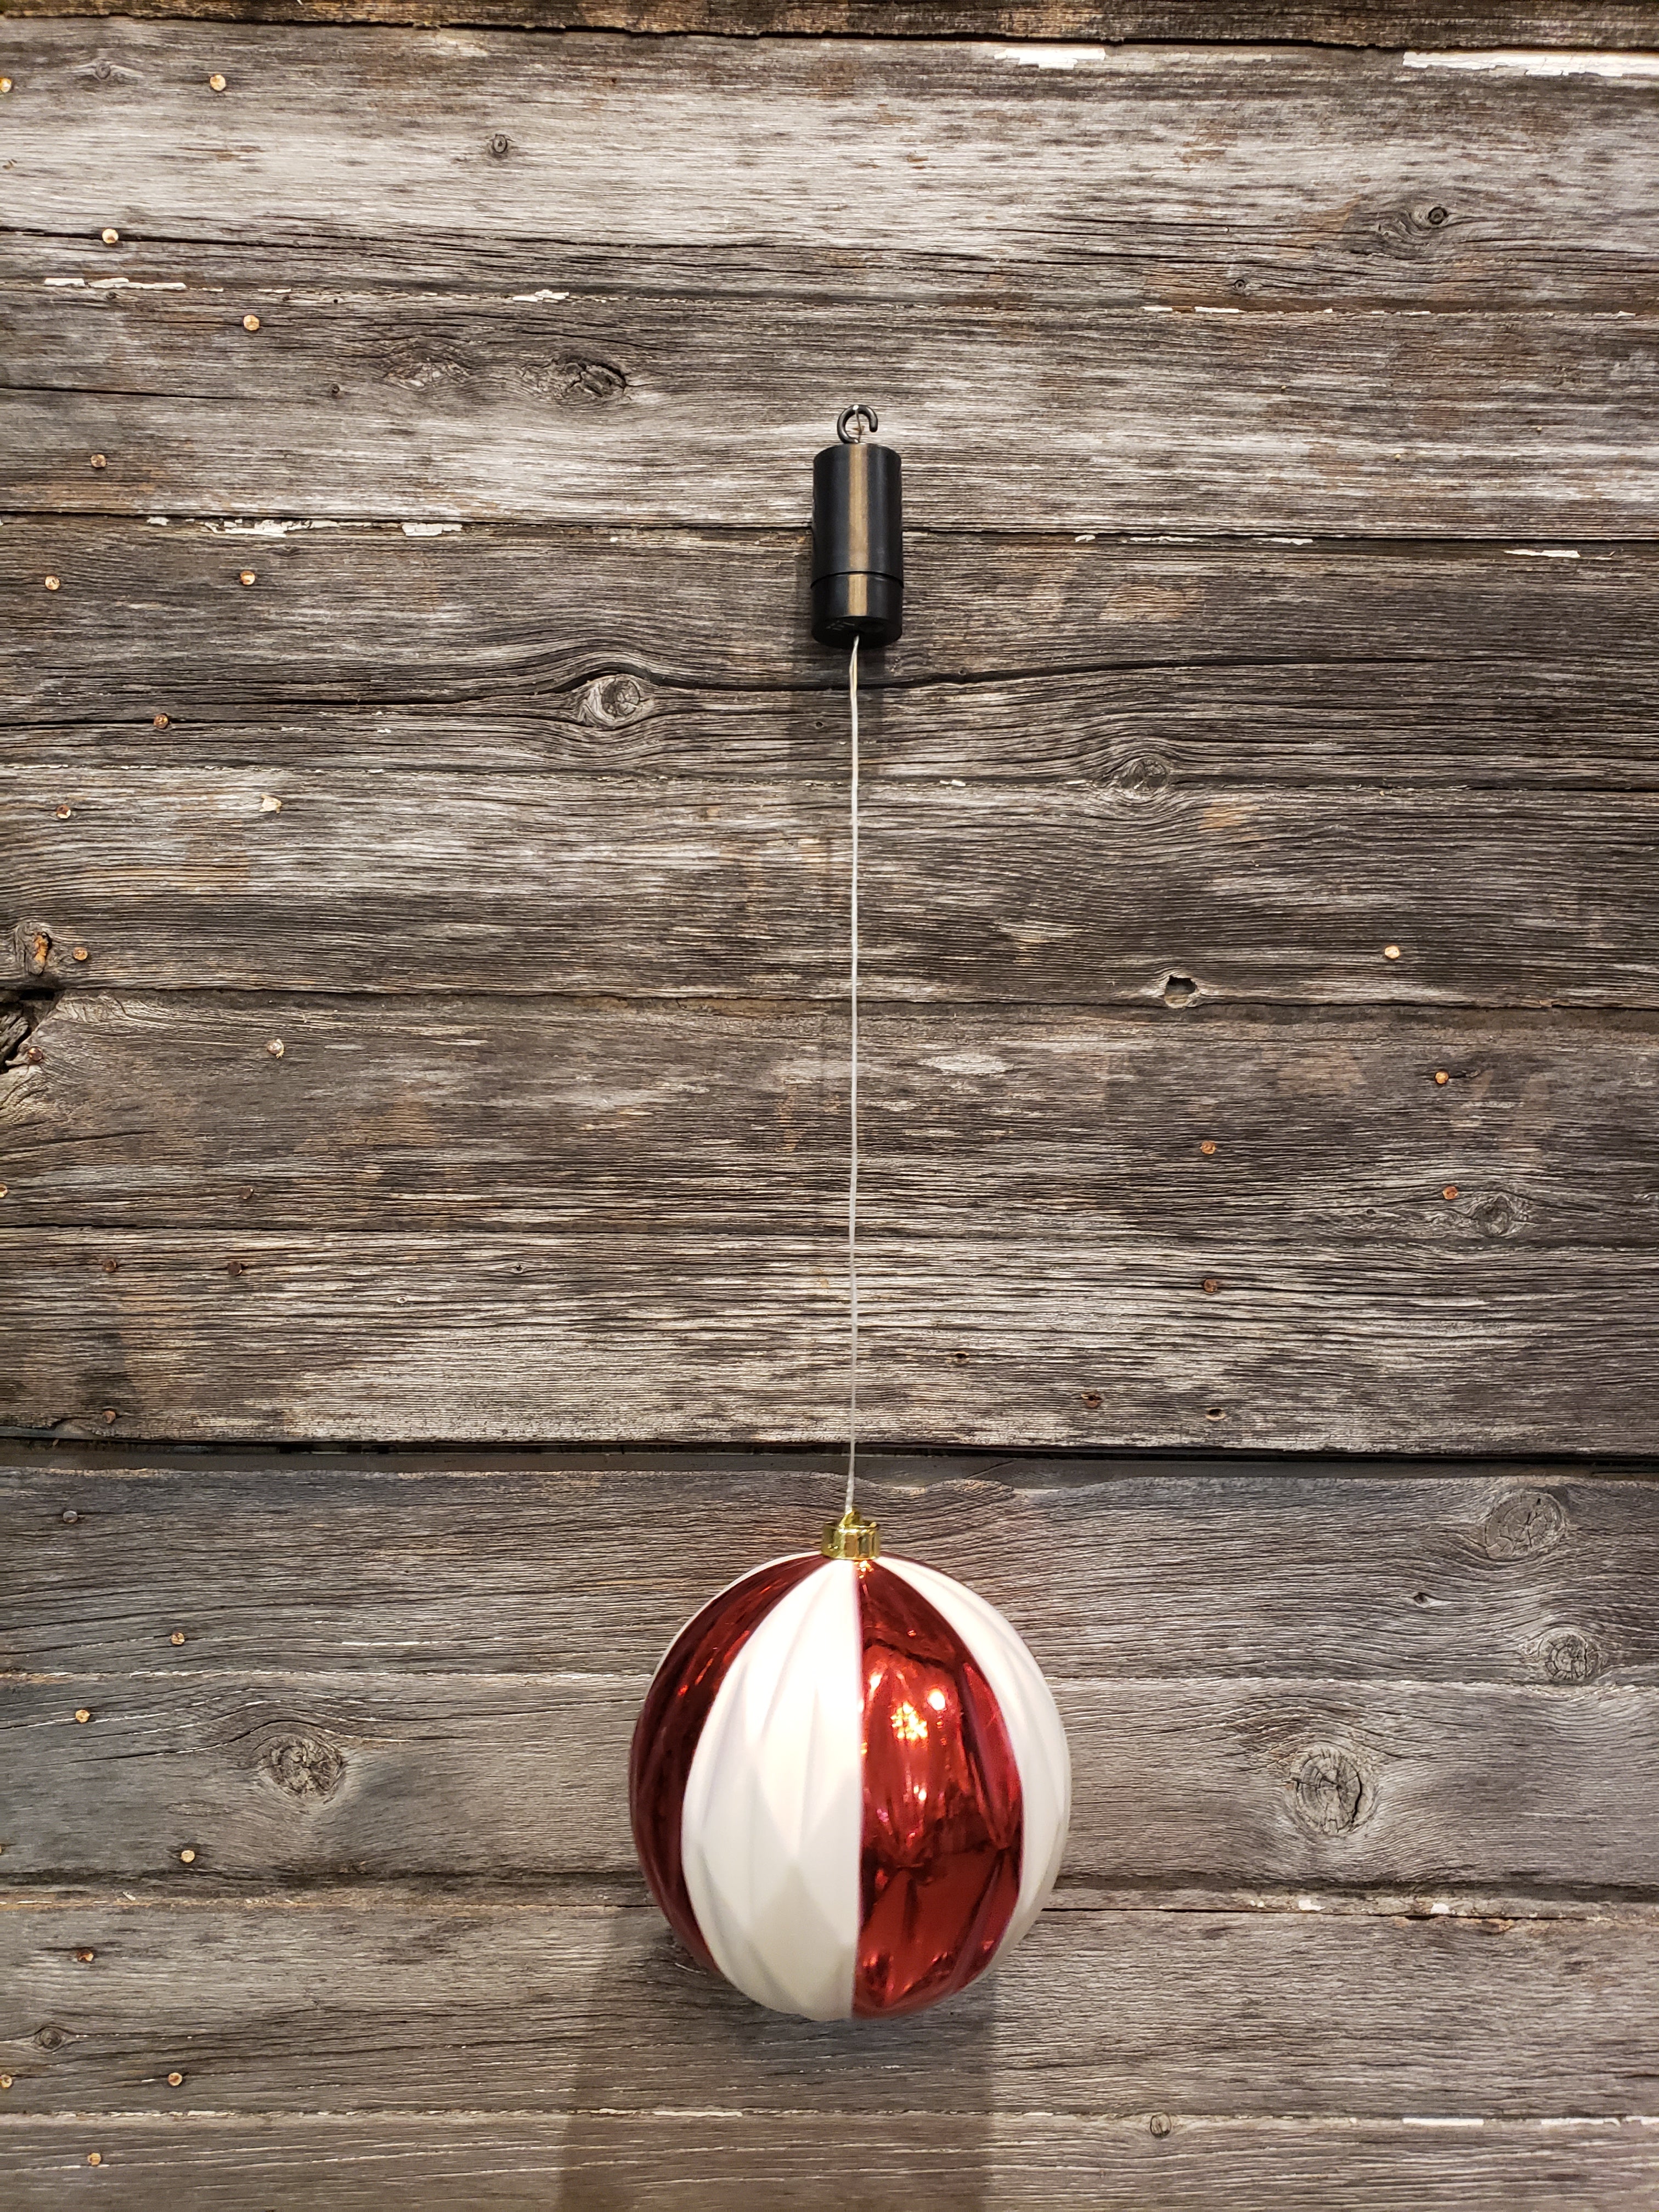 Shatterproof battery operated ornament